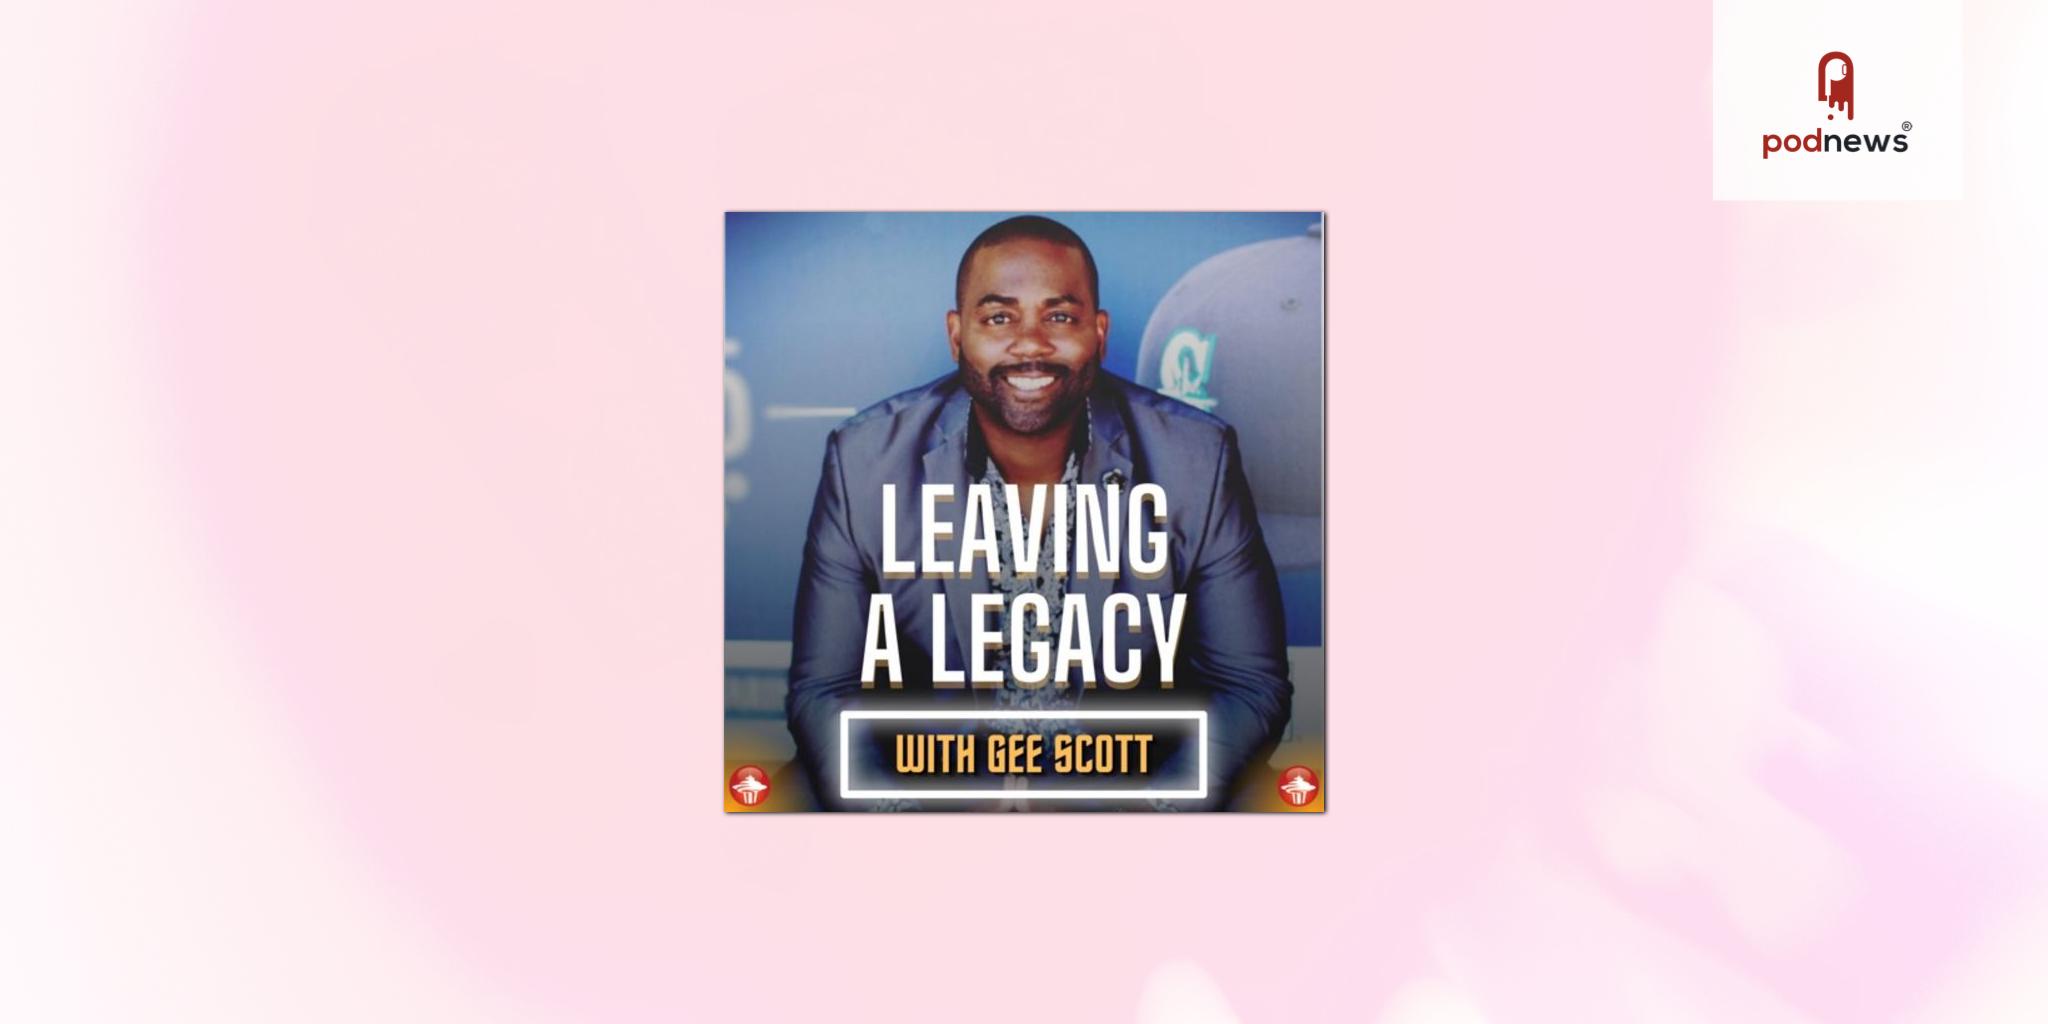 KIRO Radio launches Leaving a Legacy Podcast, hosted by Gee Scott